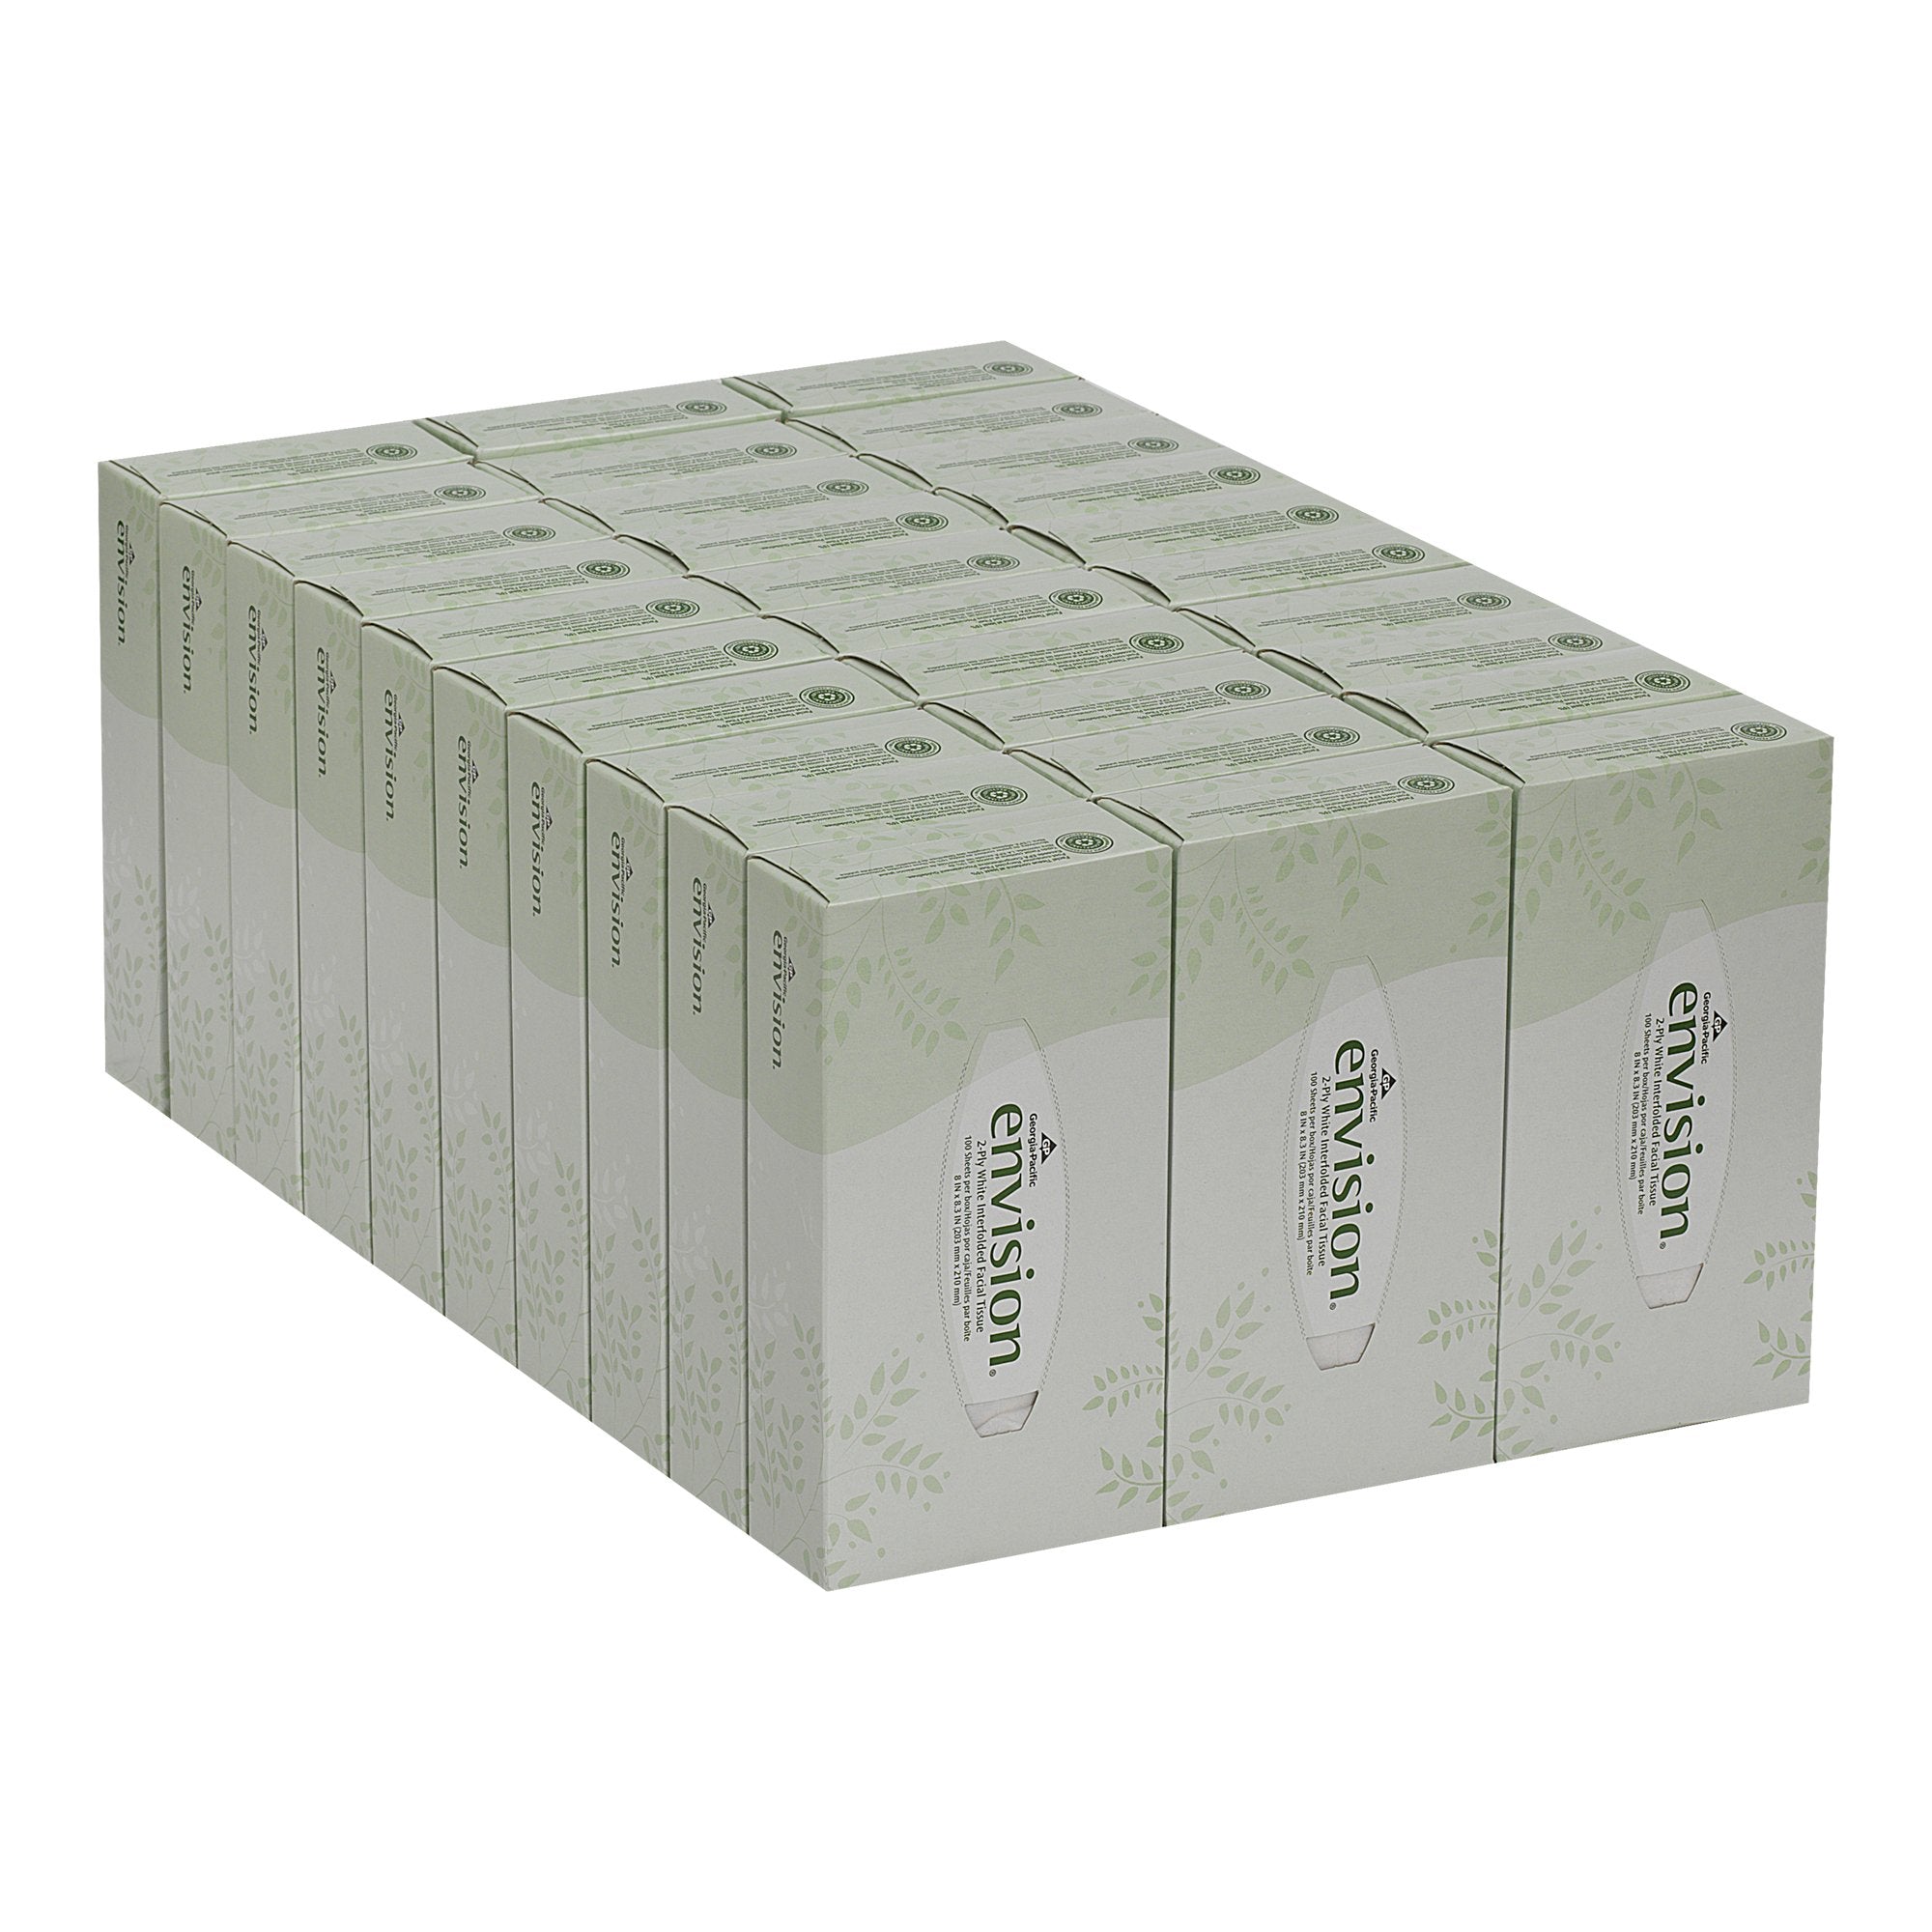 Envision® Facial Tissue White 8 X 8-3/10 Inch 100 Count